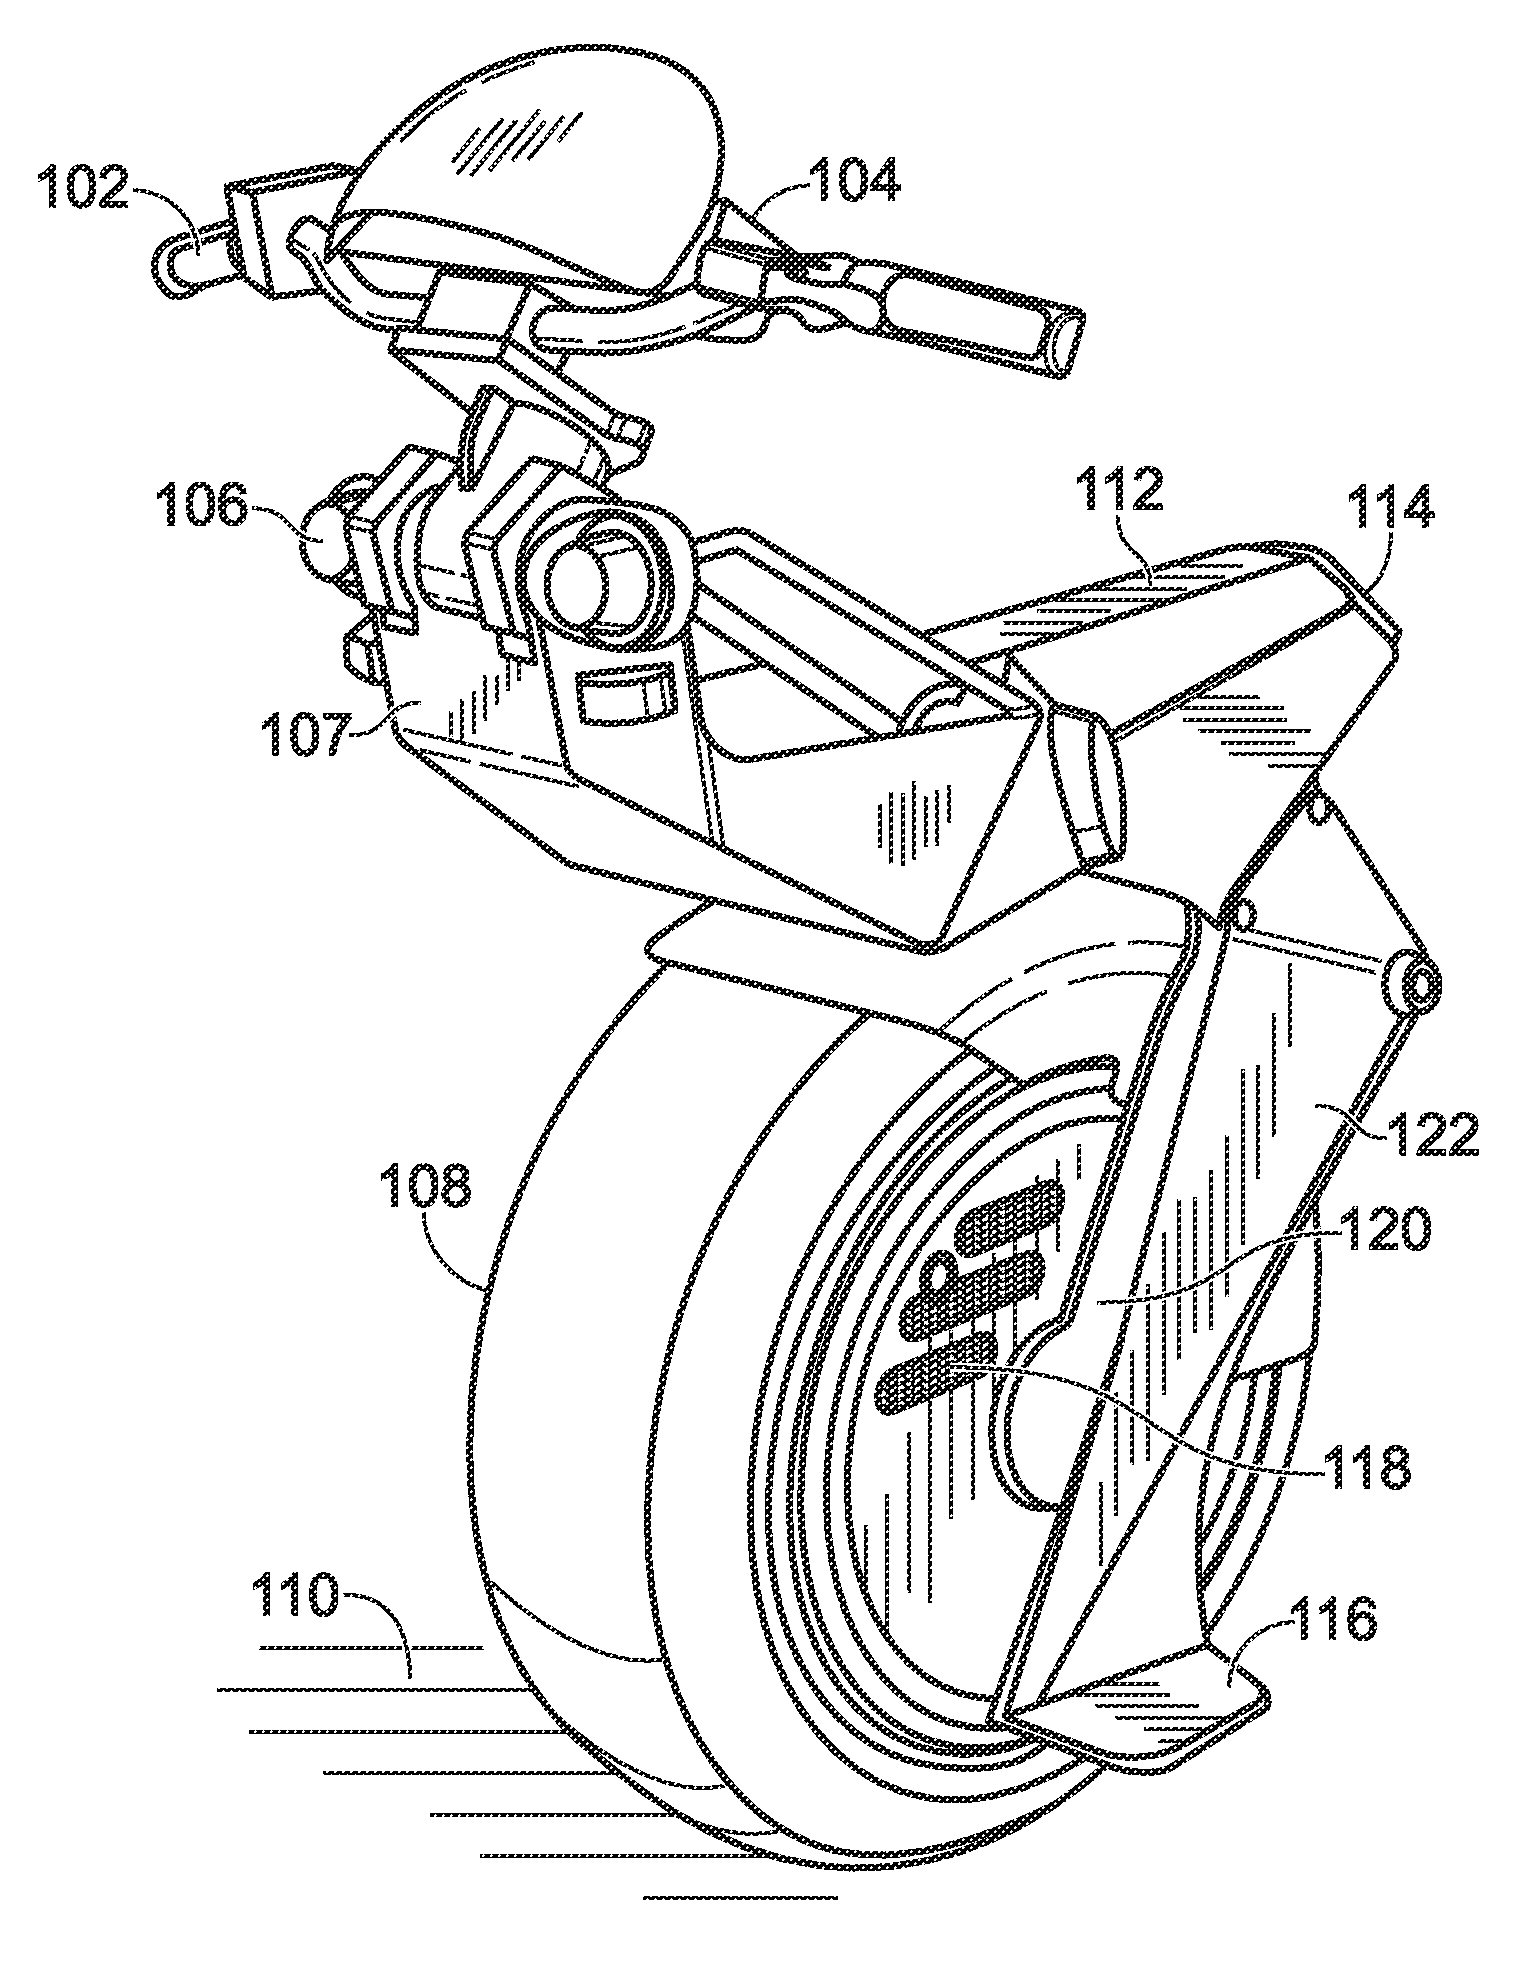 Electric-powered self-balancing unicycle with steering linkage between handlebars and wheel forks